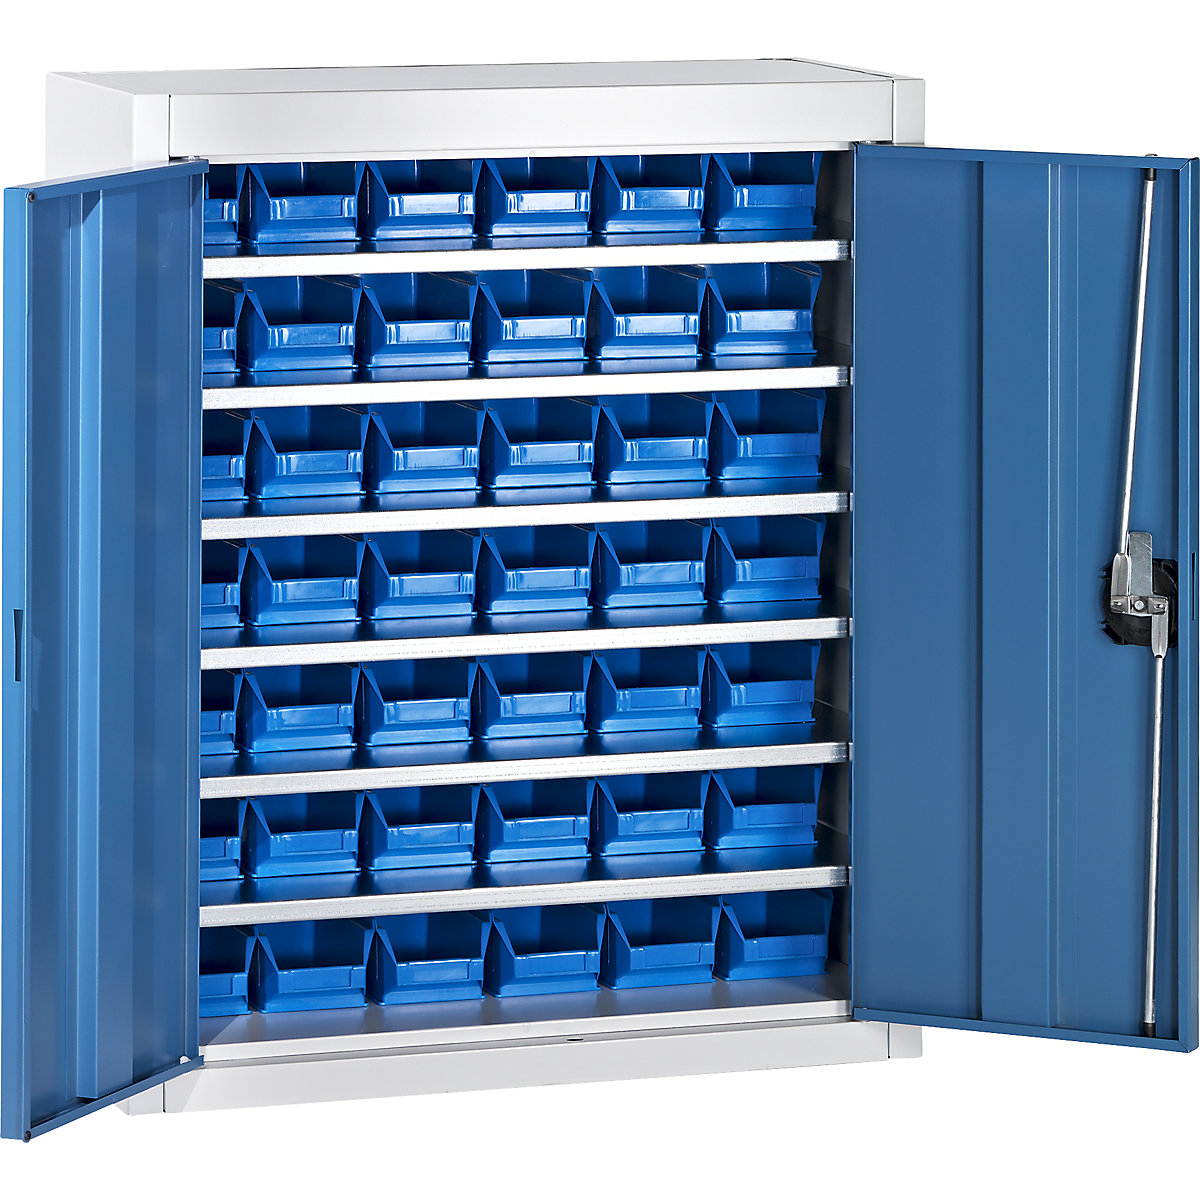 Storage cupboard with open fronted storage bins – mauser, HxWxD 820 x 680 x 280 mm, two-colour, grey body, blue doors, 42 bins, 3+ items-3